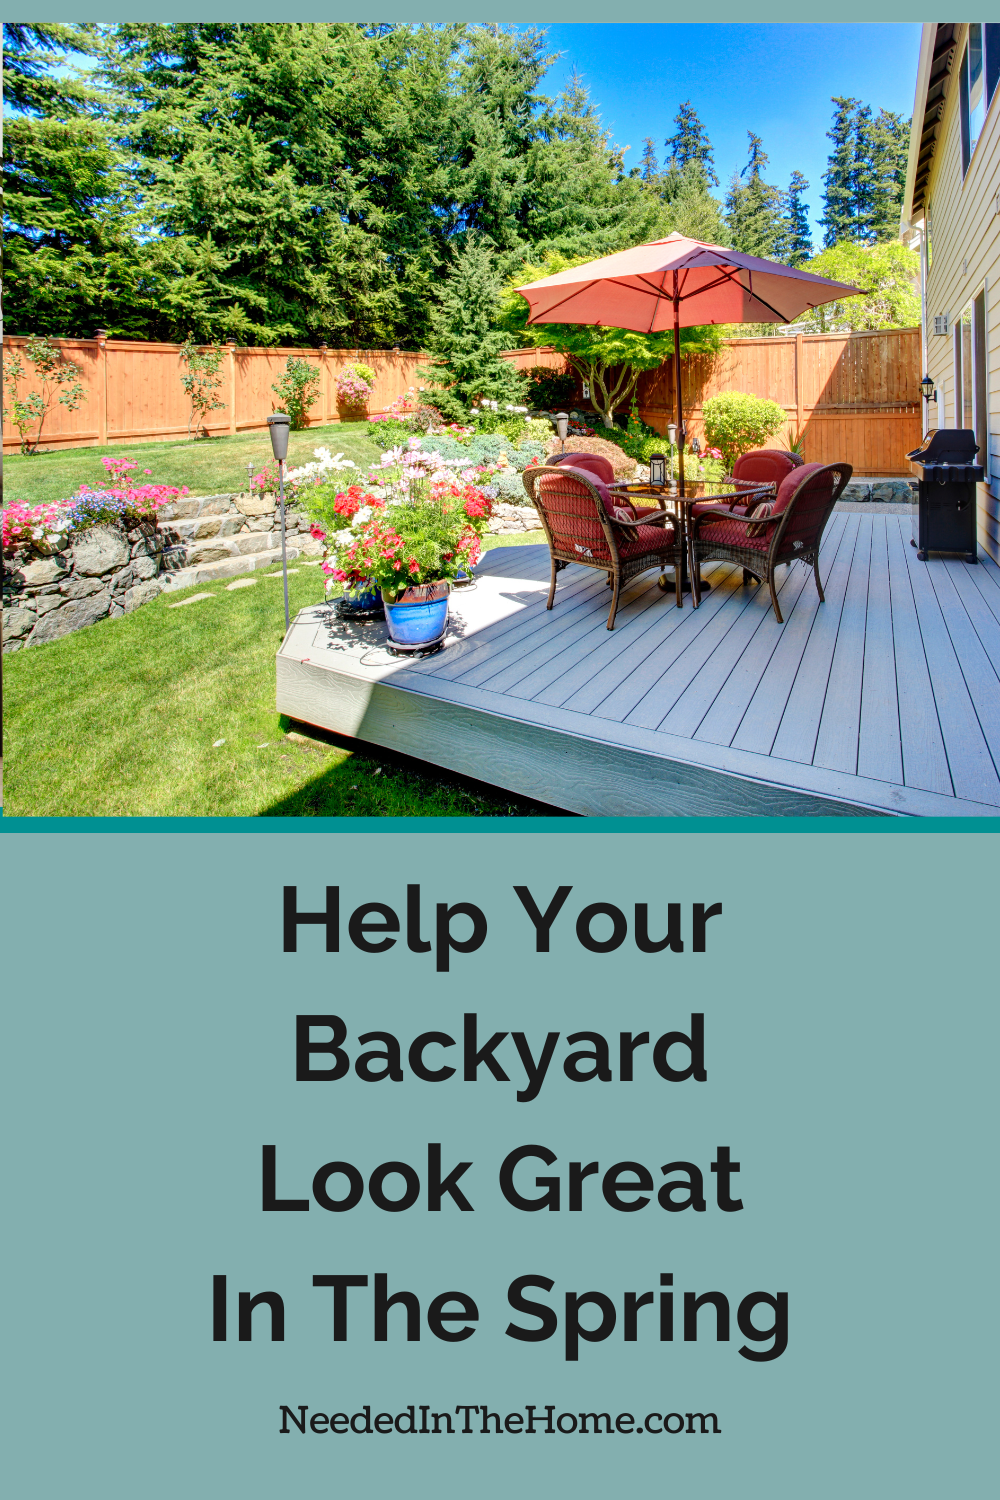 backyard patio potted plants lawn deck chairs table umbrella grill help your backyard look great in the spring neededinthehome